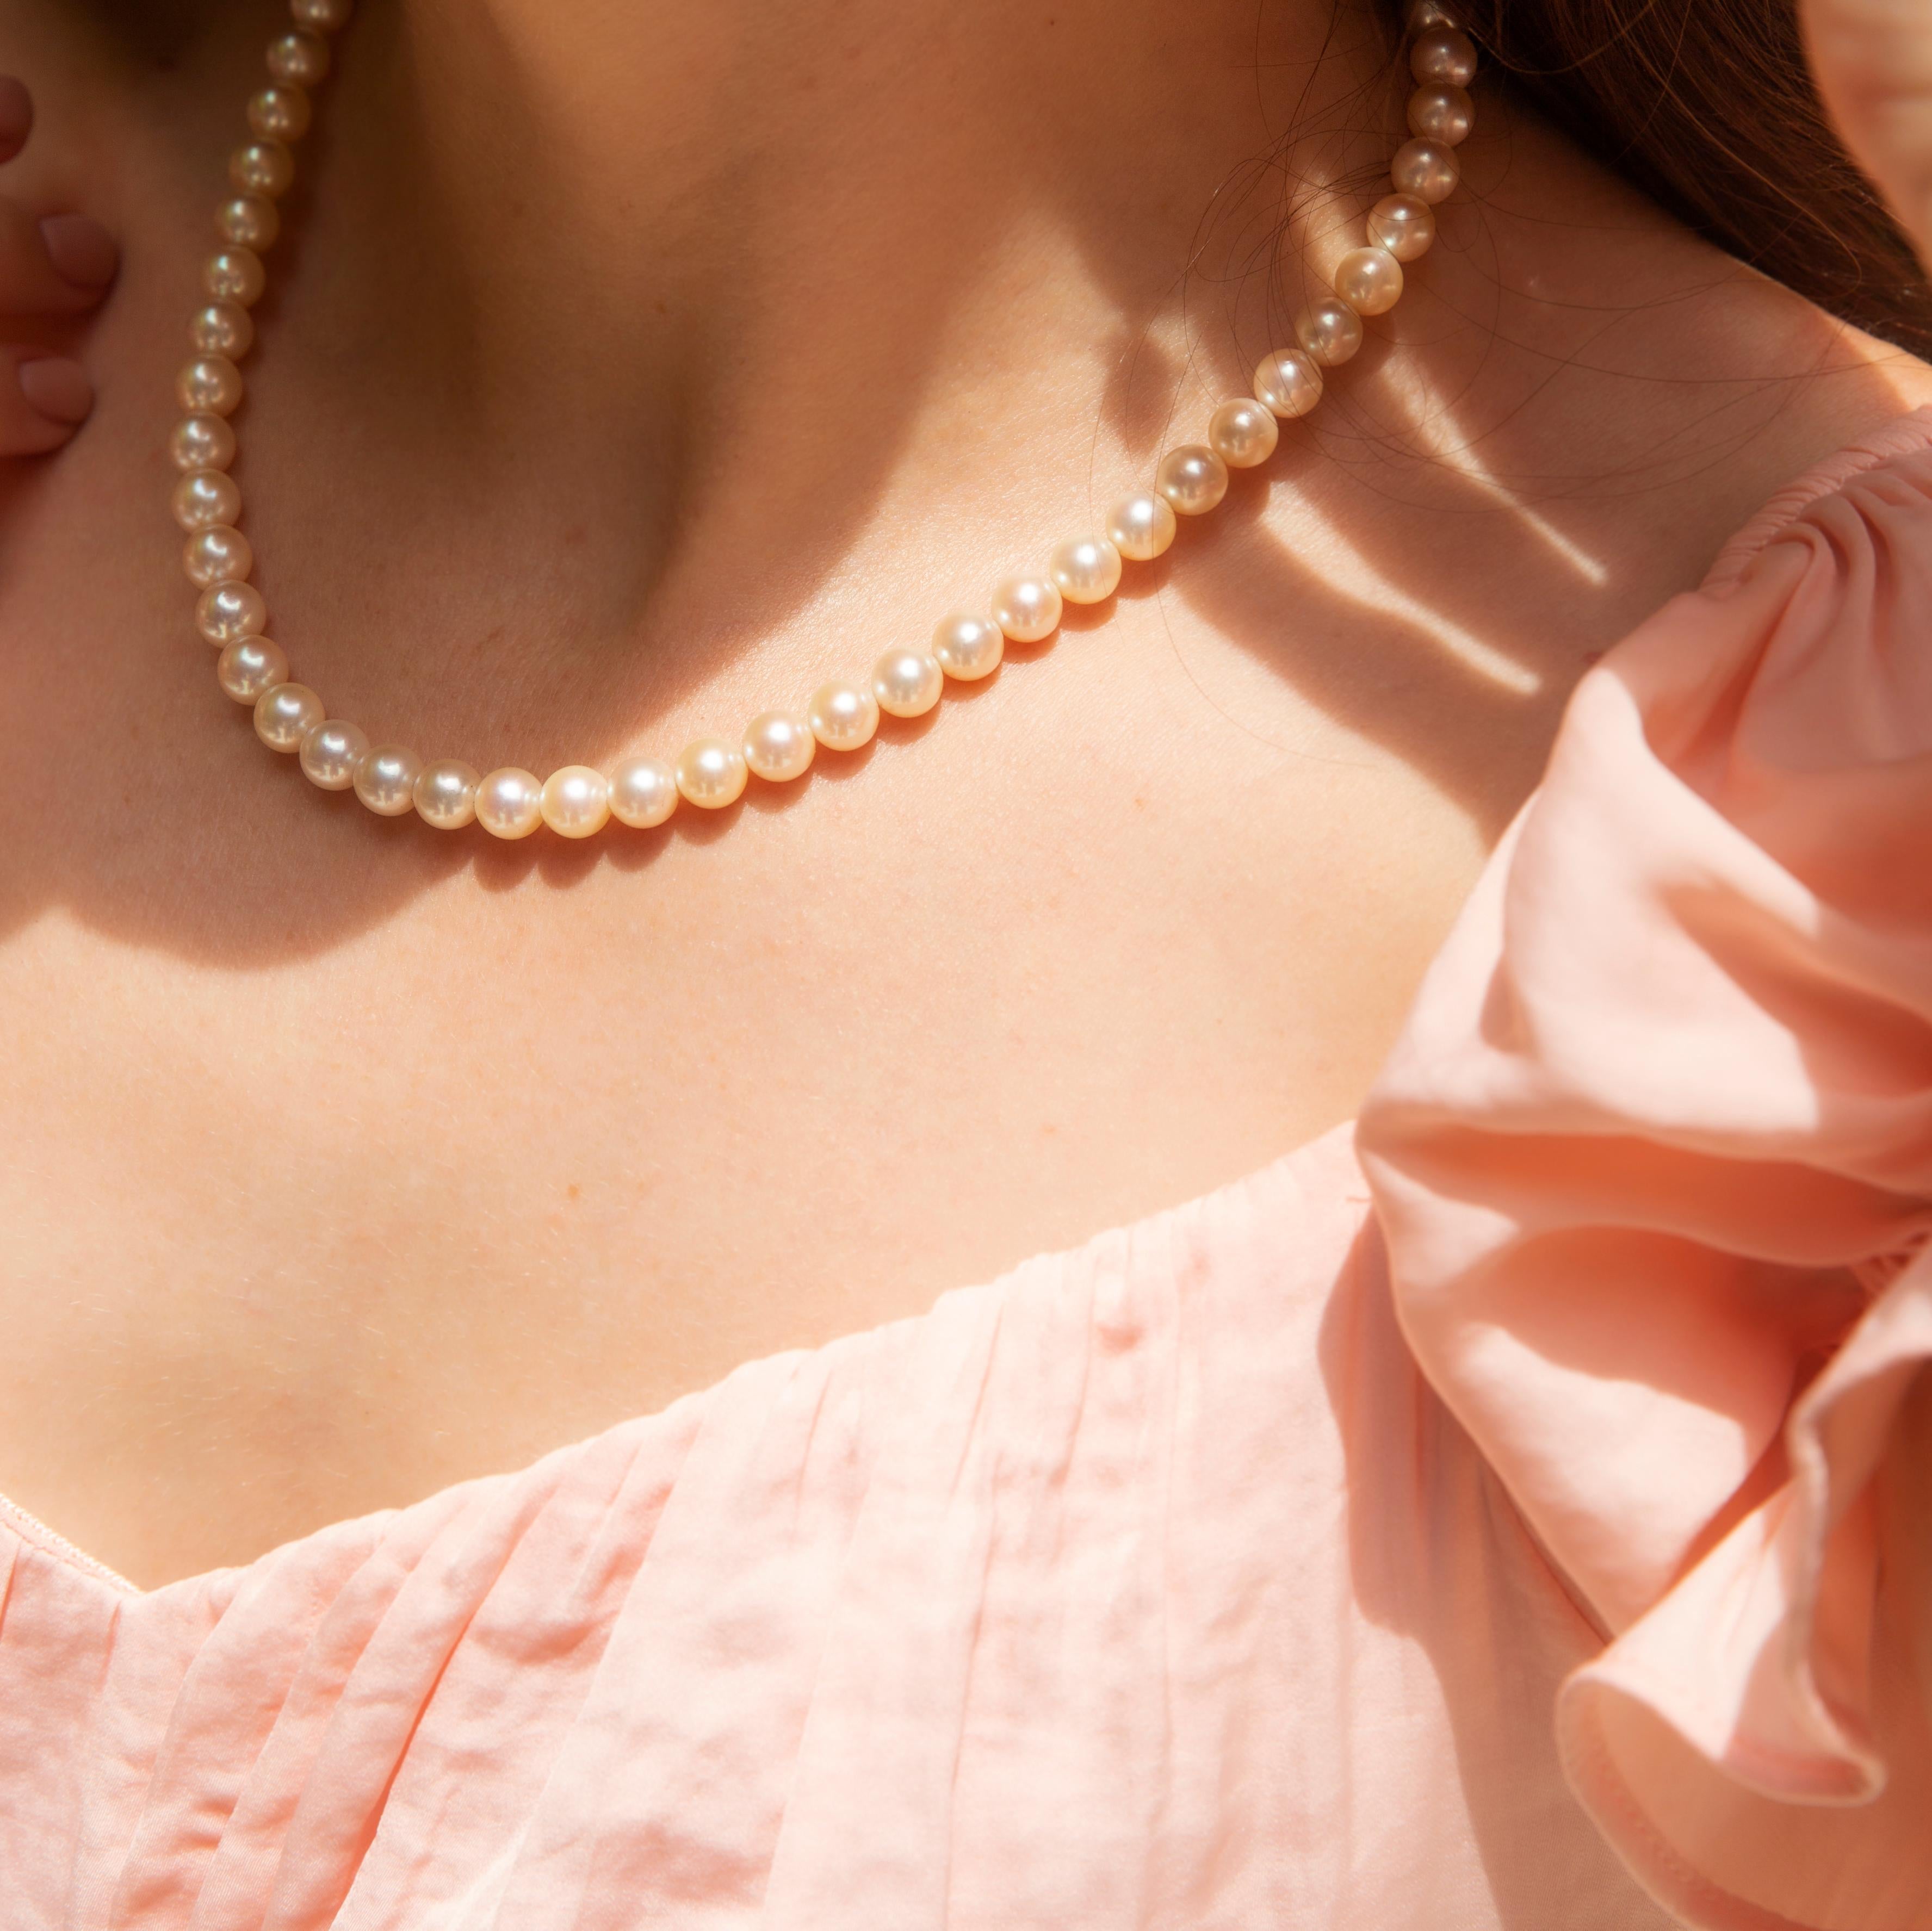 Thoughtfully strung together, this gorgeous strand of fifty-seven round off-white cultured Akoya pearls radiates with high lustre. We have named this stunningly elegant piece The Mikimoto Necklace. Lovely for wearing any time or place, she is